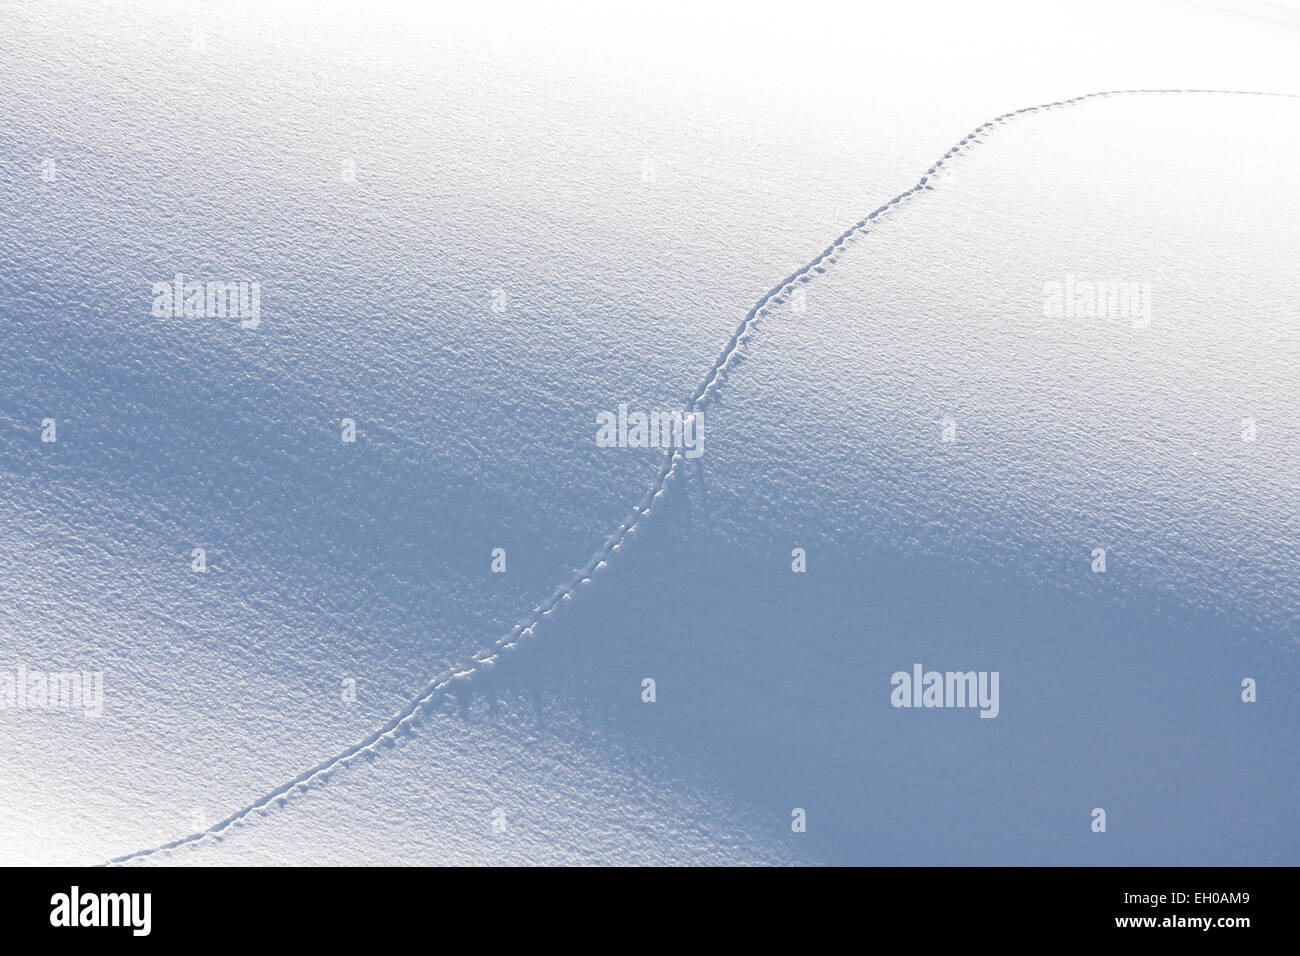 A small track of an animal in the snow. Stock Photo